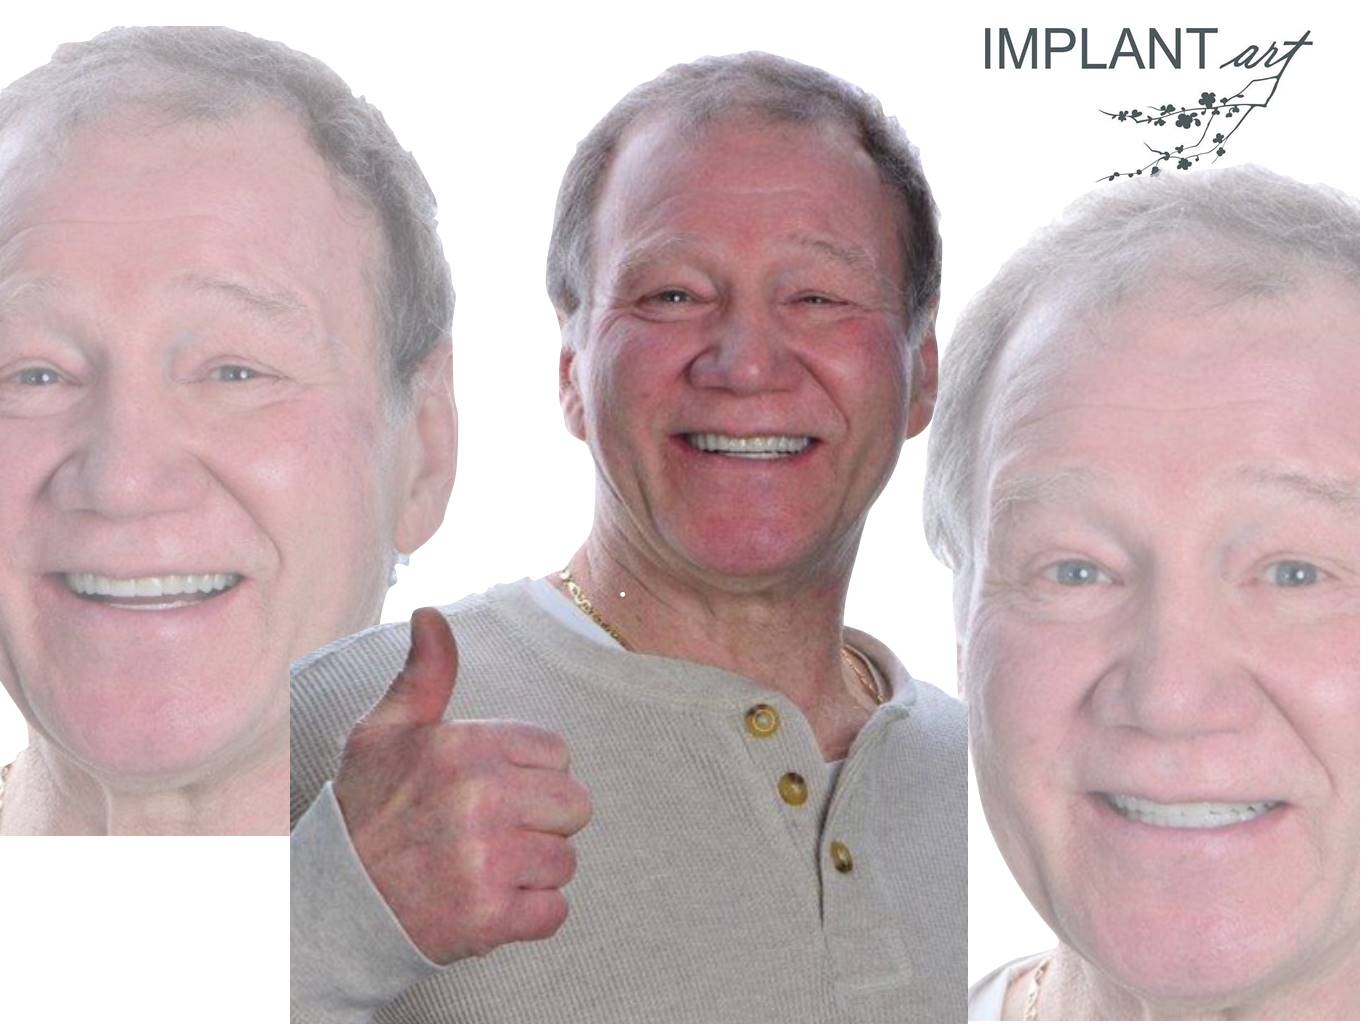 All-ceramic crowns on teeth and implants